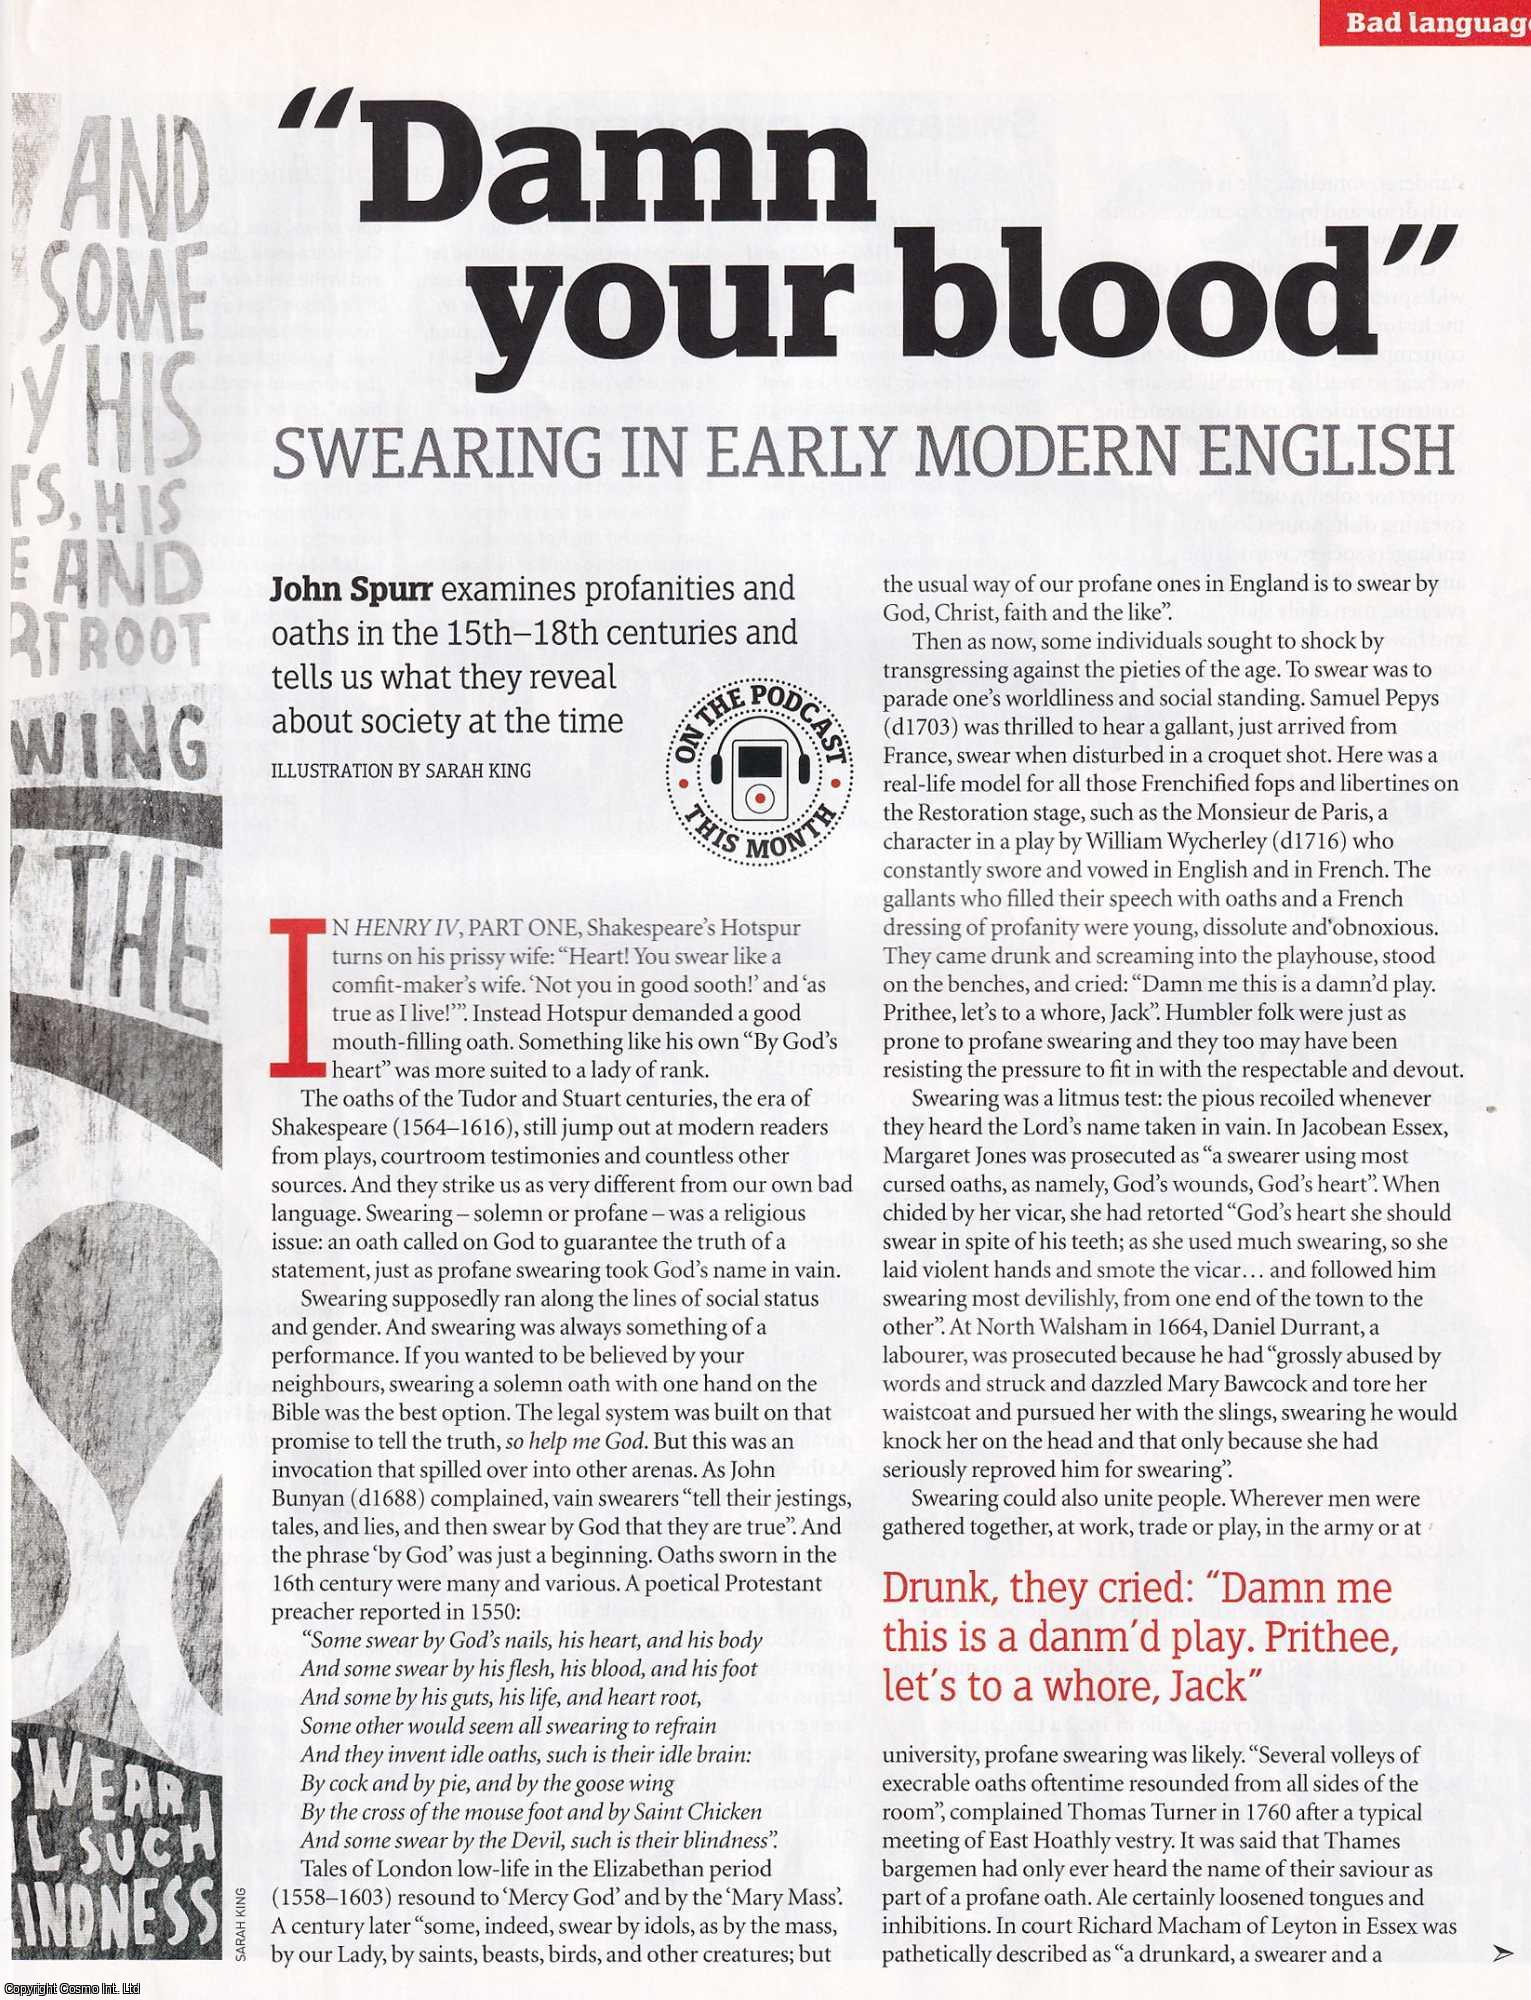 John Spurr - Damn Your Blood': Swearing in Early Modern English. Profanities and oaths in the 15th-18th centuries and what they reveal about society at the time. An original article from BBC History Magazine, 2010.